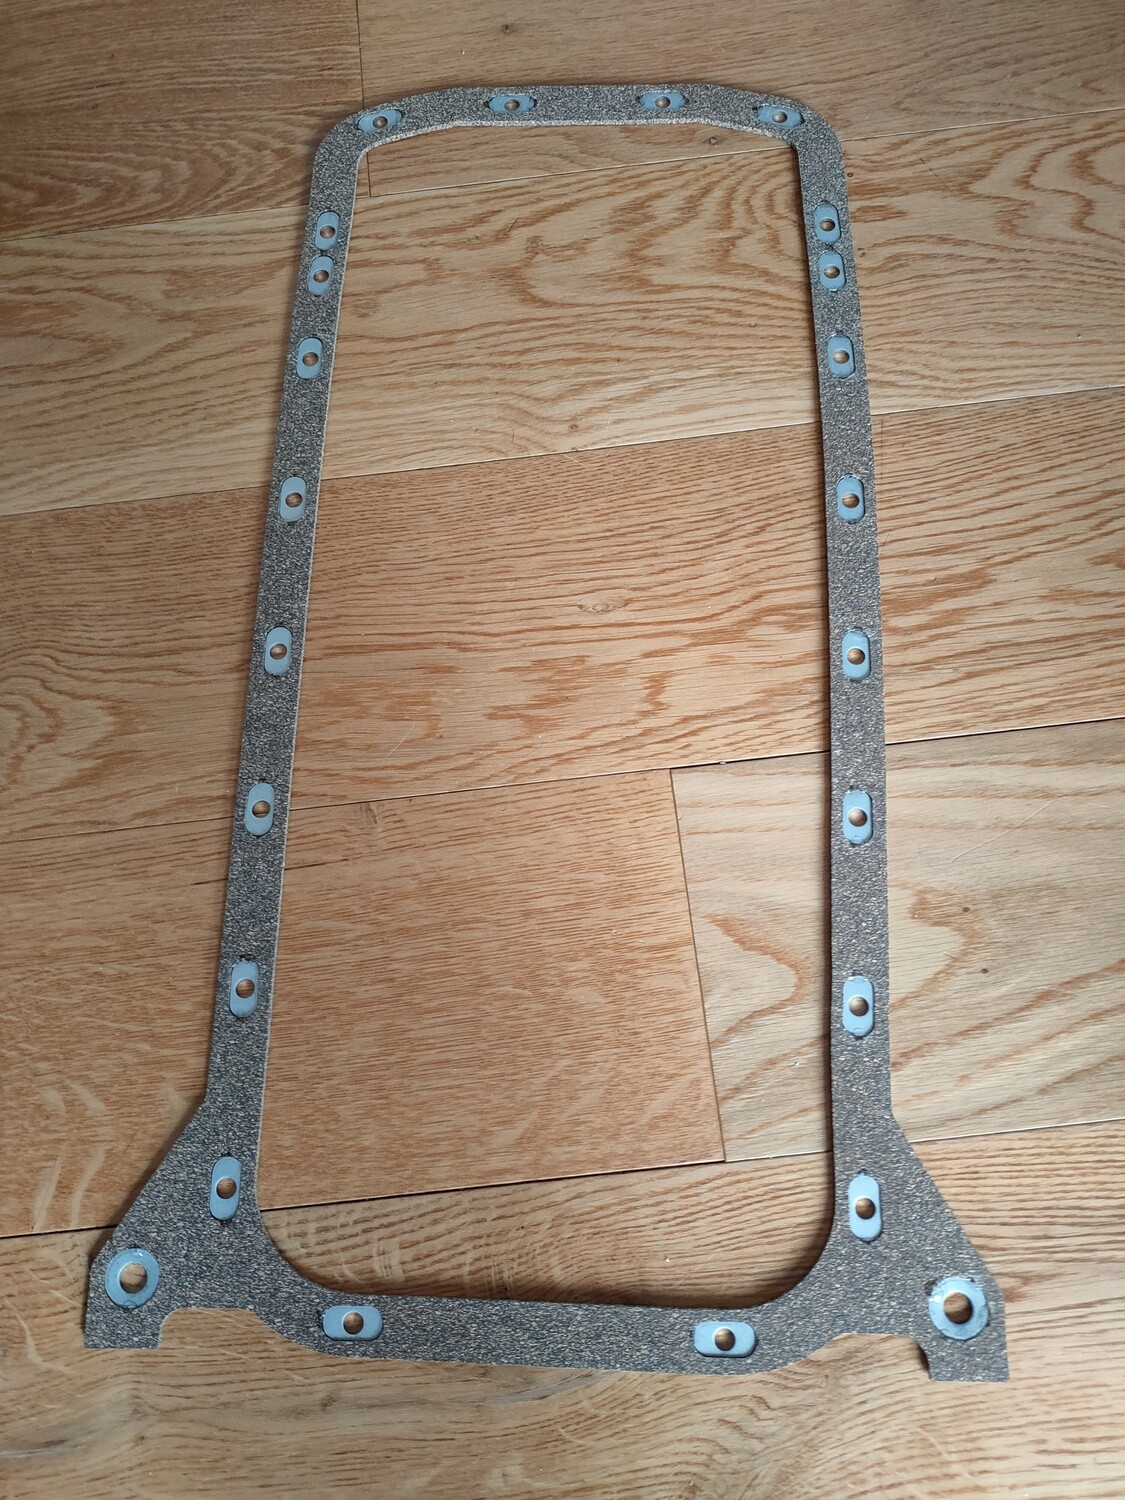 Sump Gasket Murena 2.2 With metal inserts